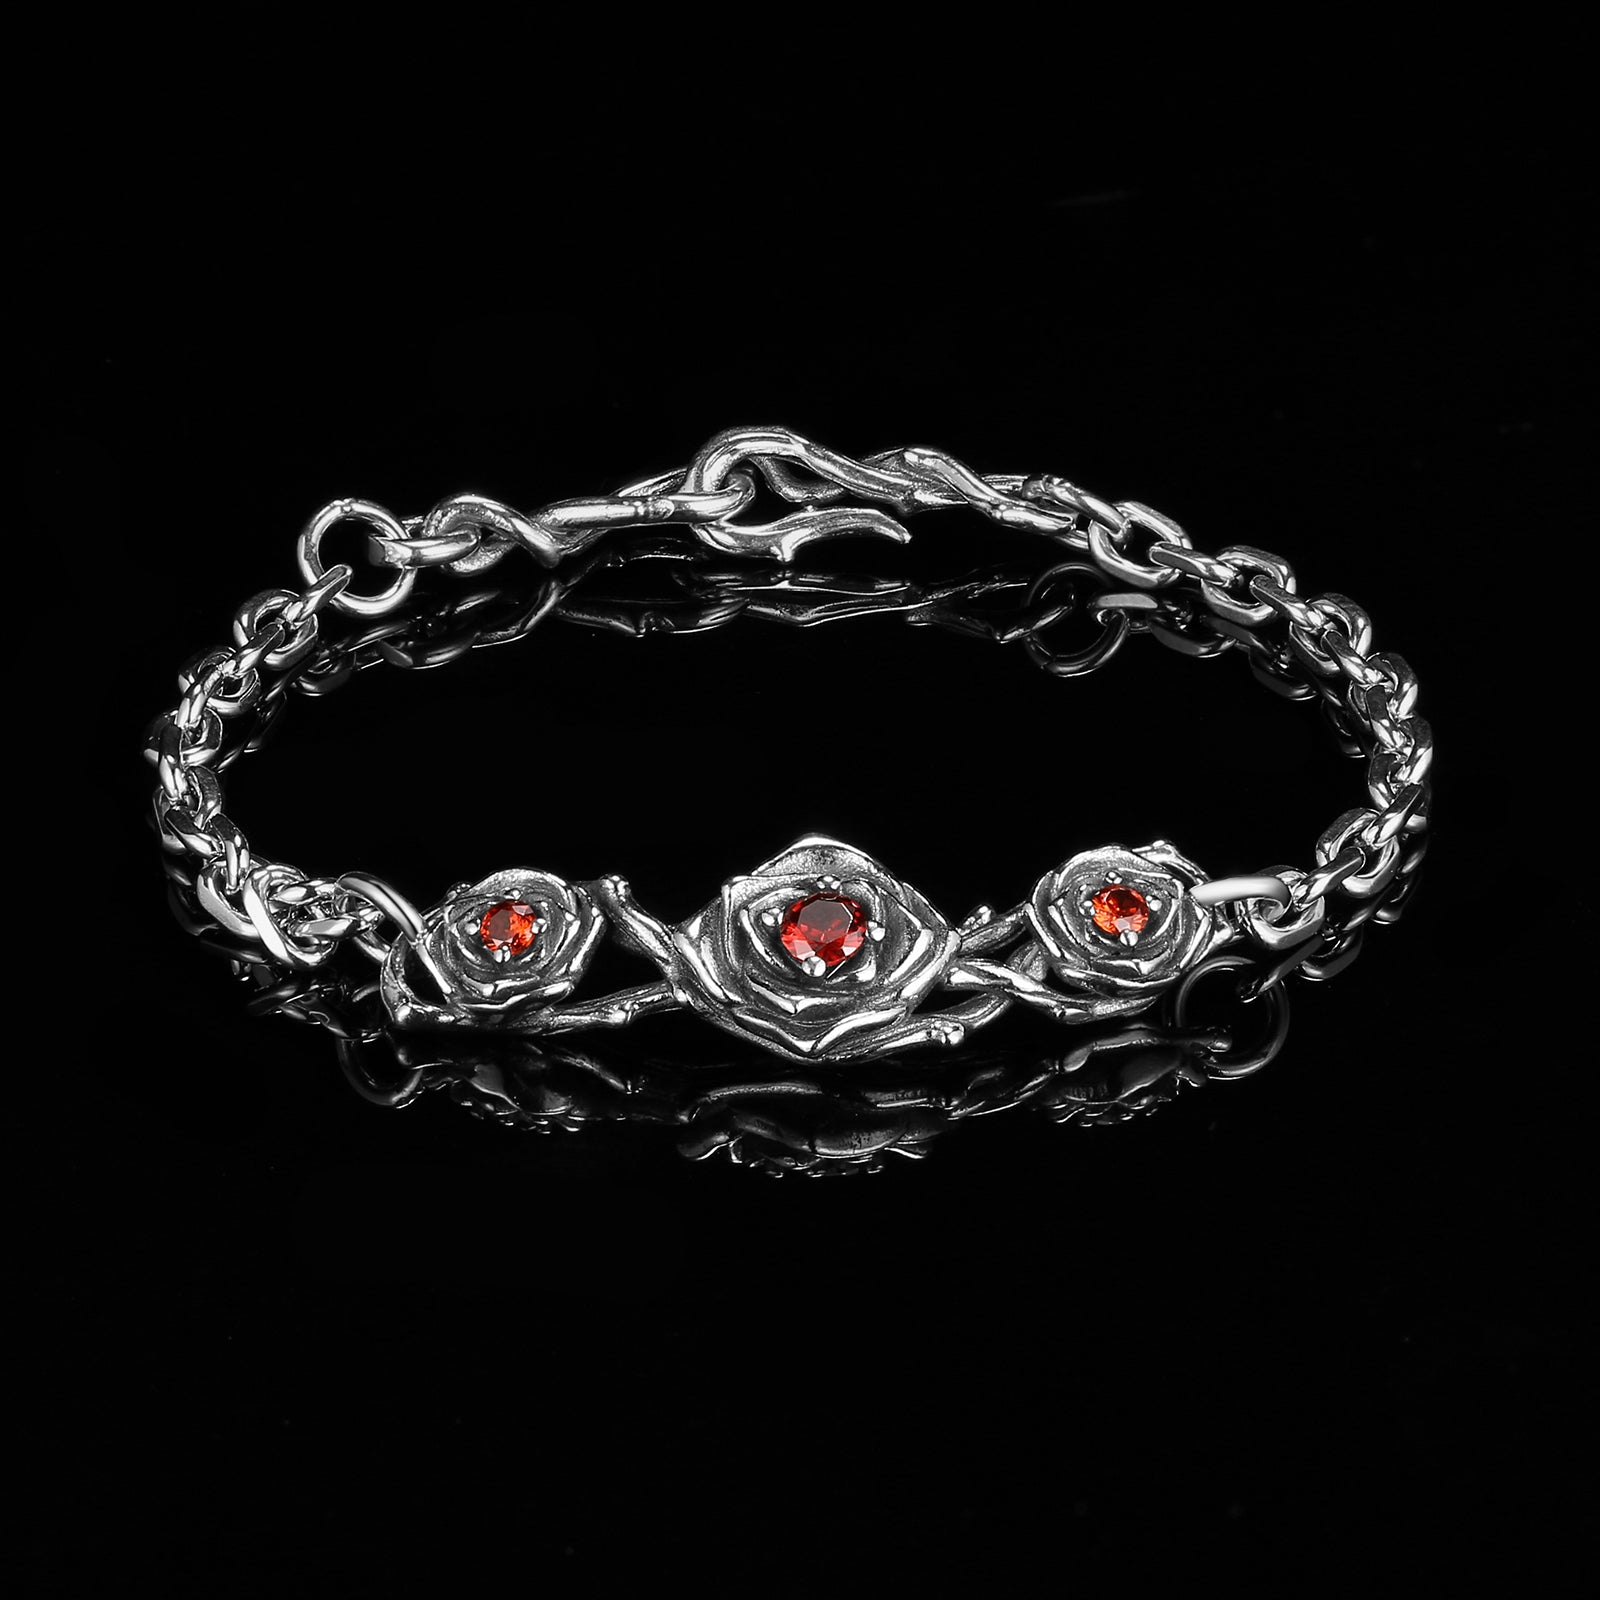 RED ROSES BRACCIALETTO. - ARGENTO STERLING 925